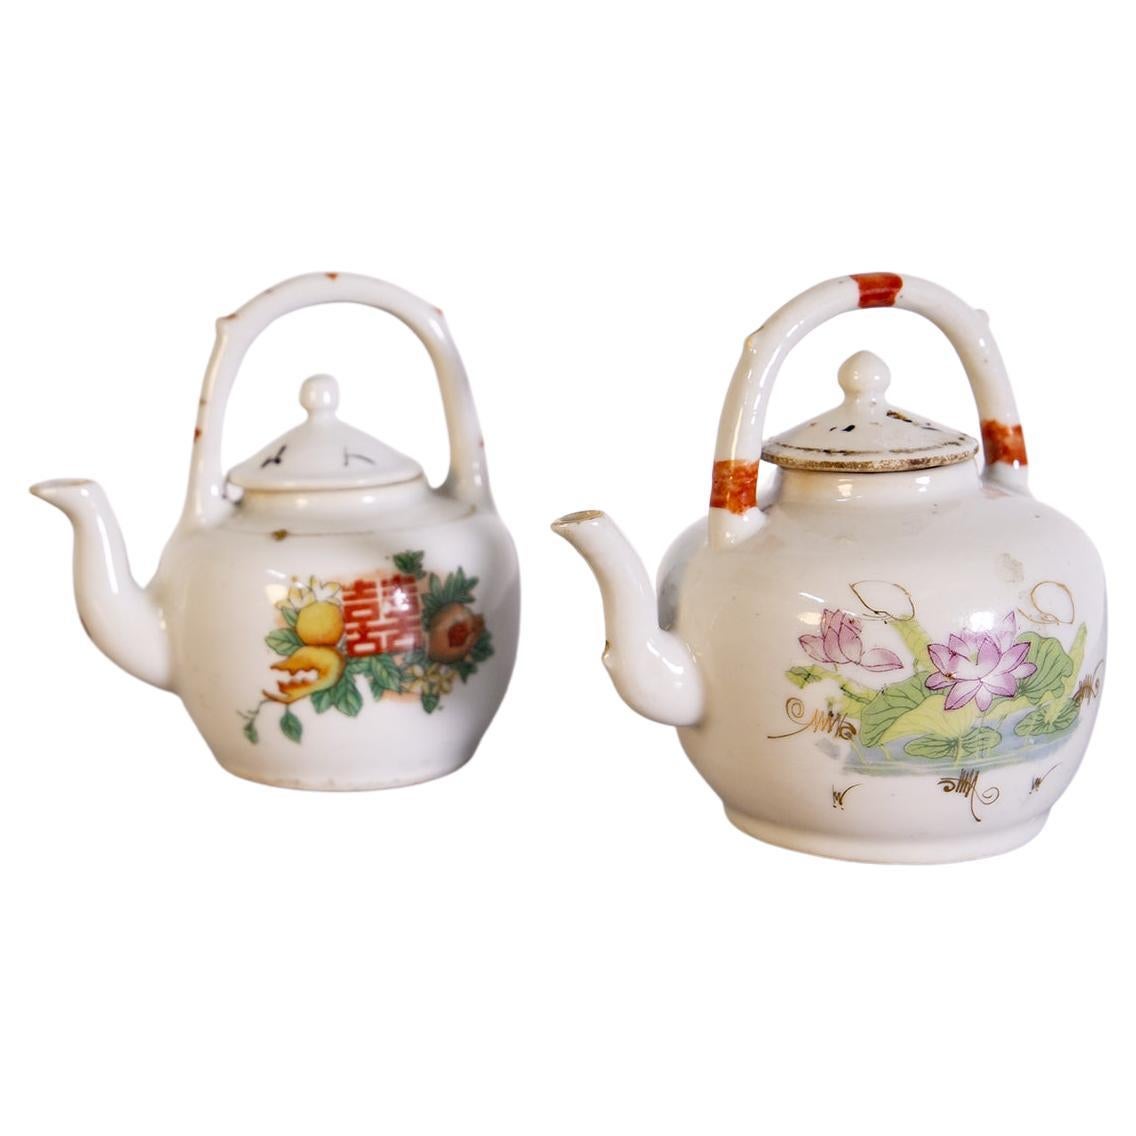 Vintage Chinese Teapots in Hand Painted Ceramic